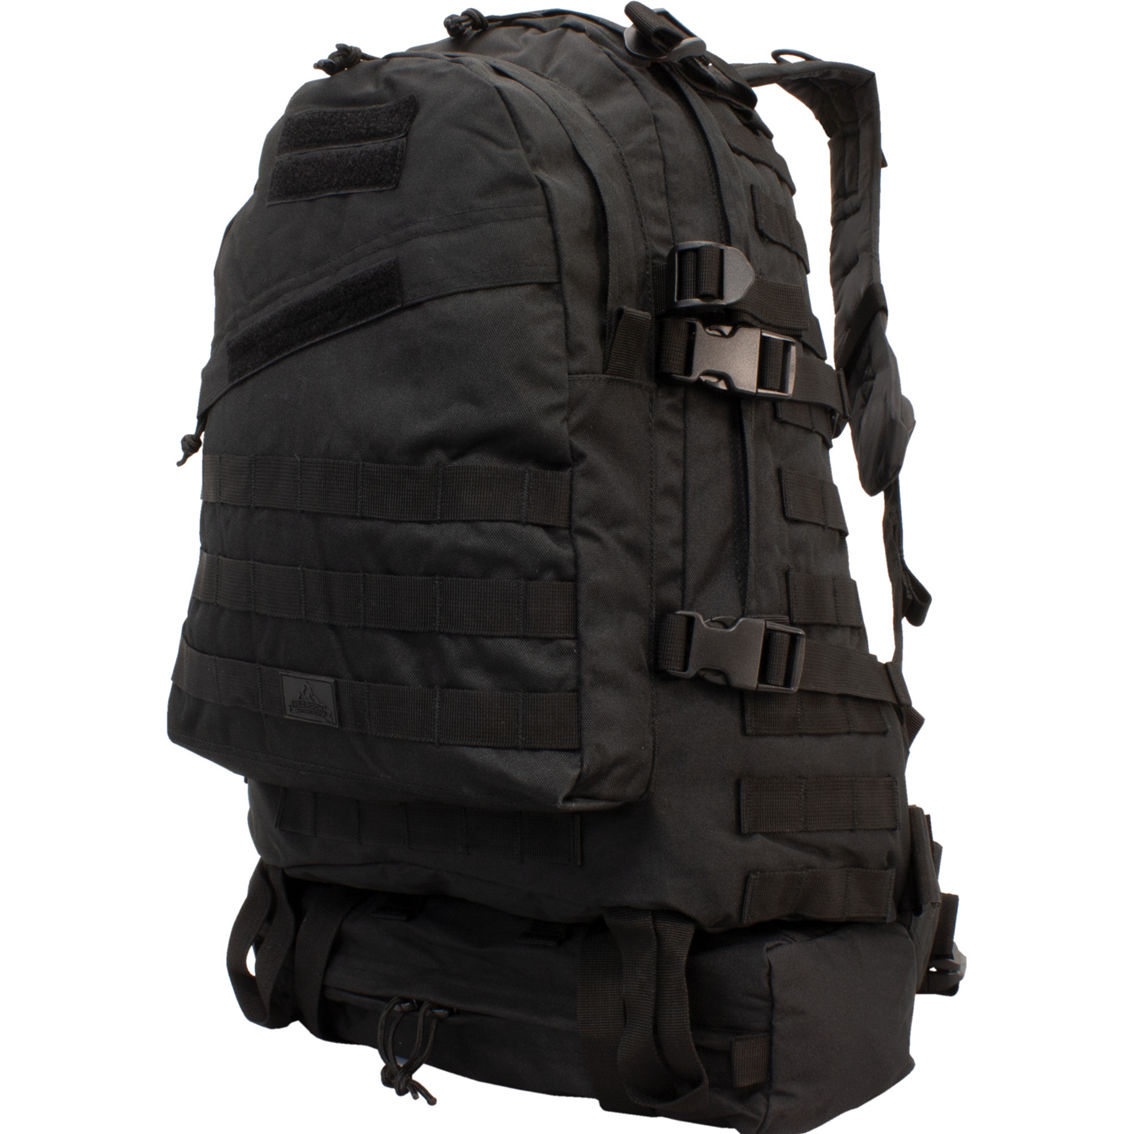 Red Rock Outdoor Gear Engagement Pack | Backpacks | Clothing ...